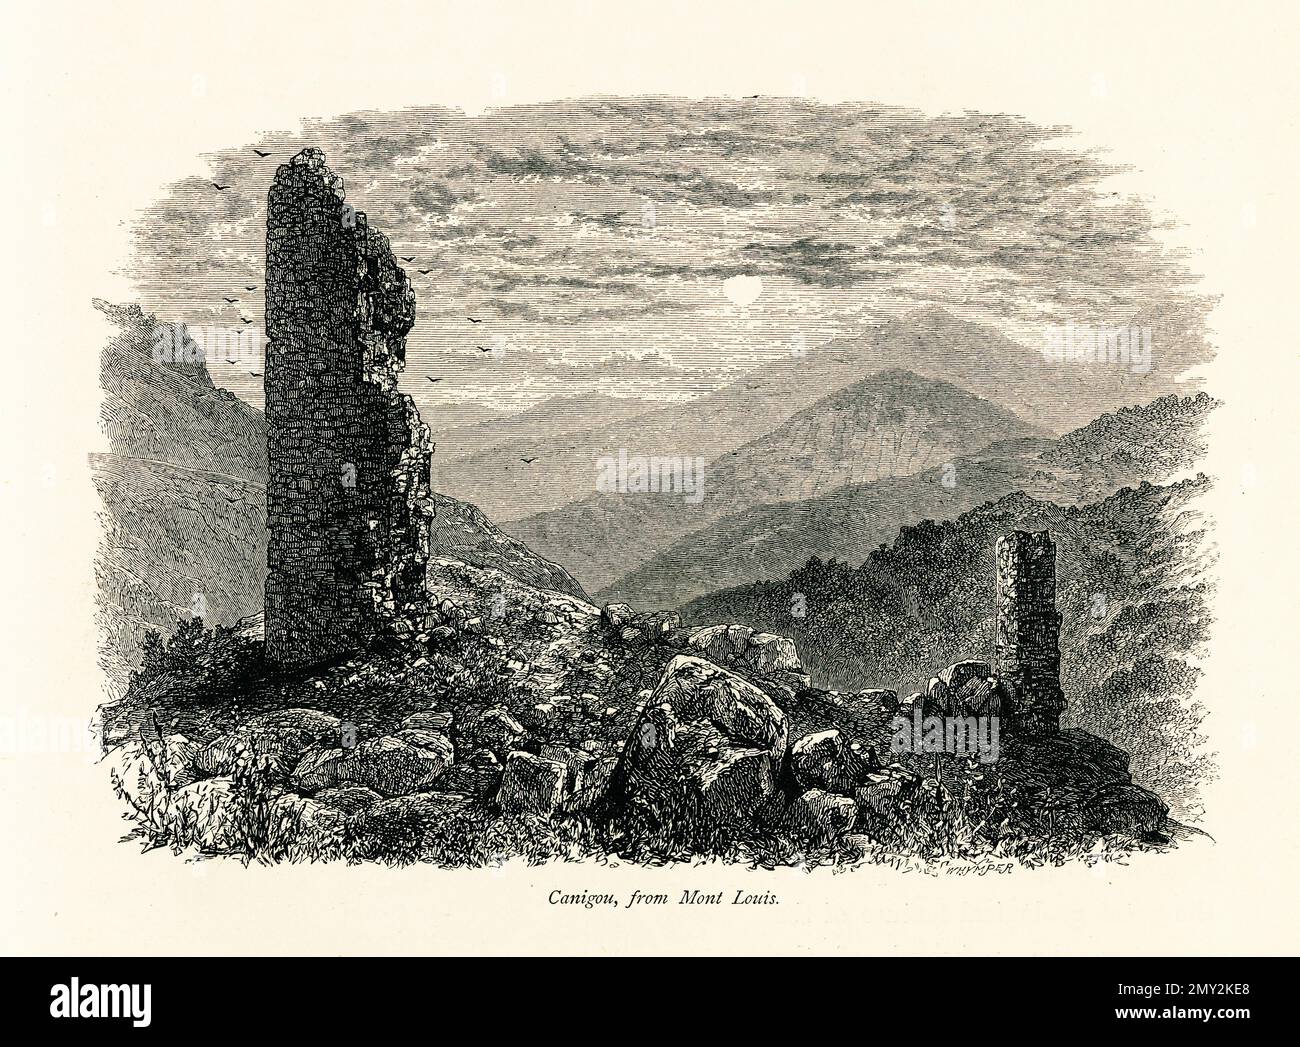 Antique illustration of Canigou, a mountain in the Catalan Pyrenees of southern France. Engraving published in Picturesque Europe, Vol. III (Cassell & Stock Photo